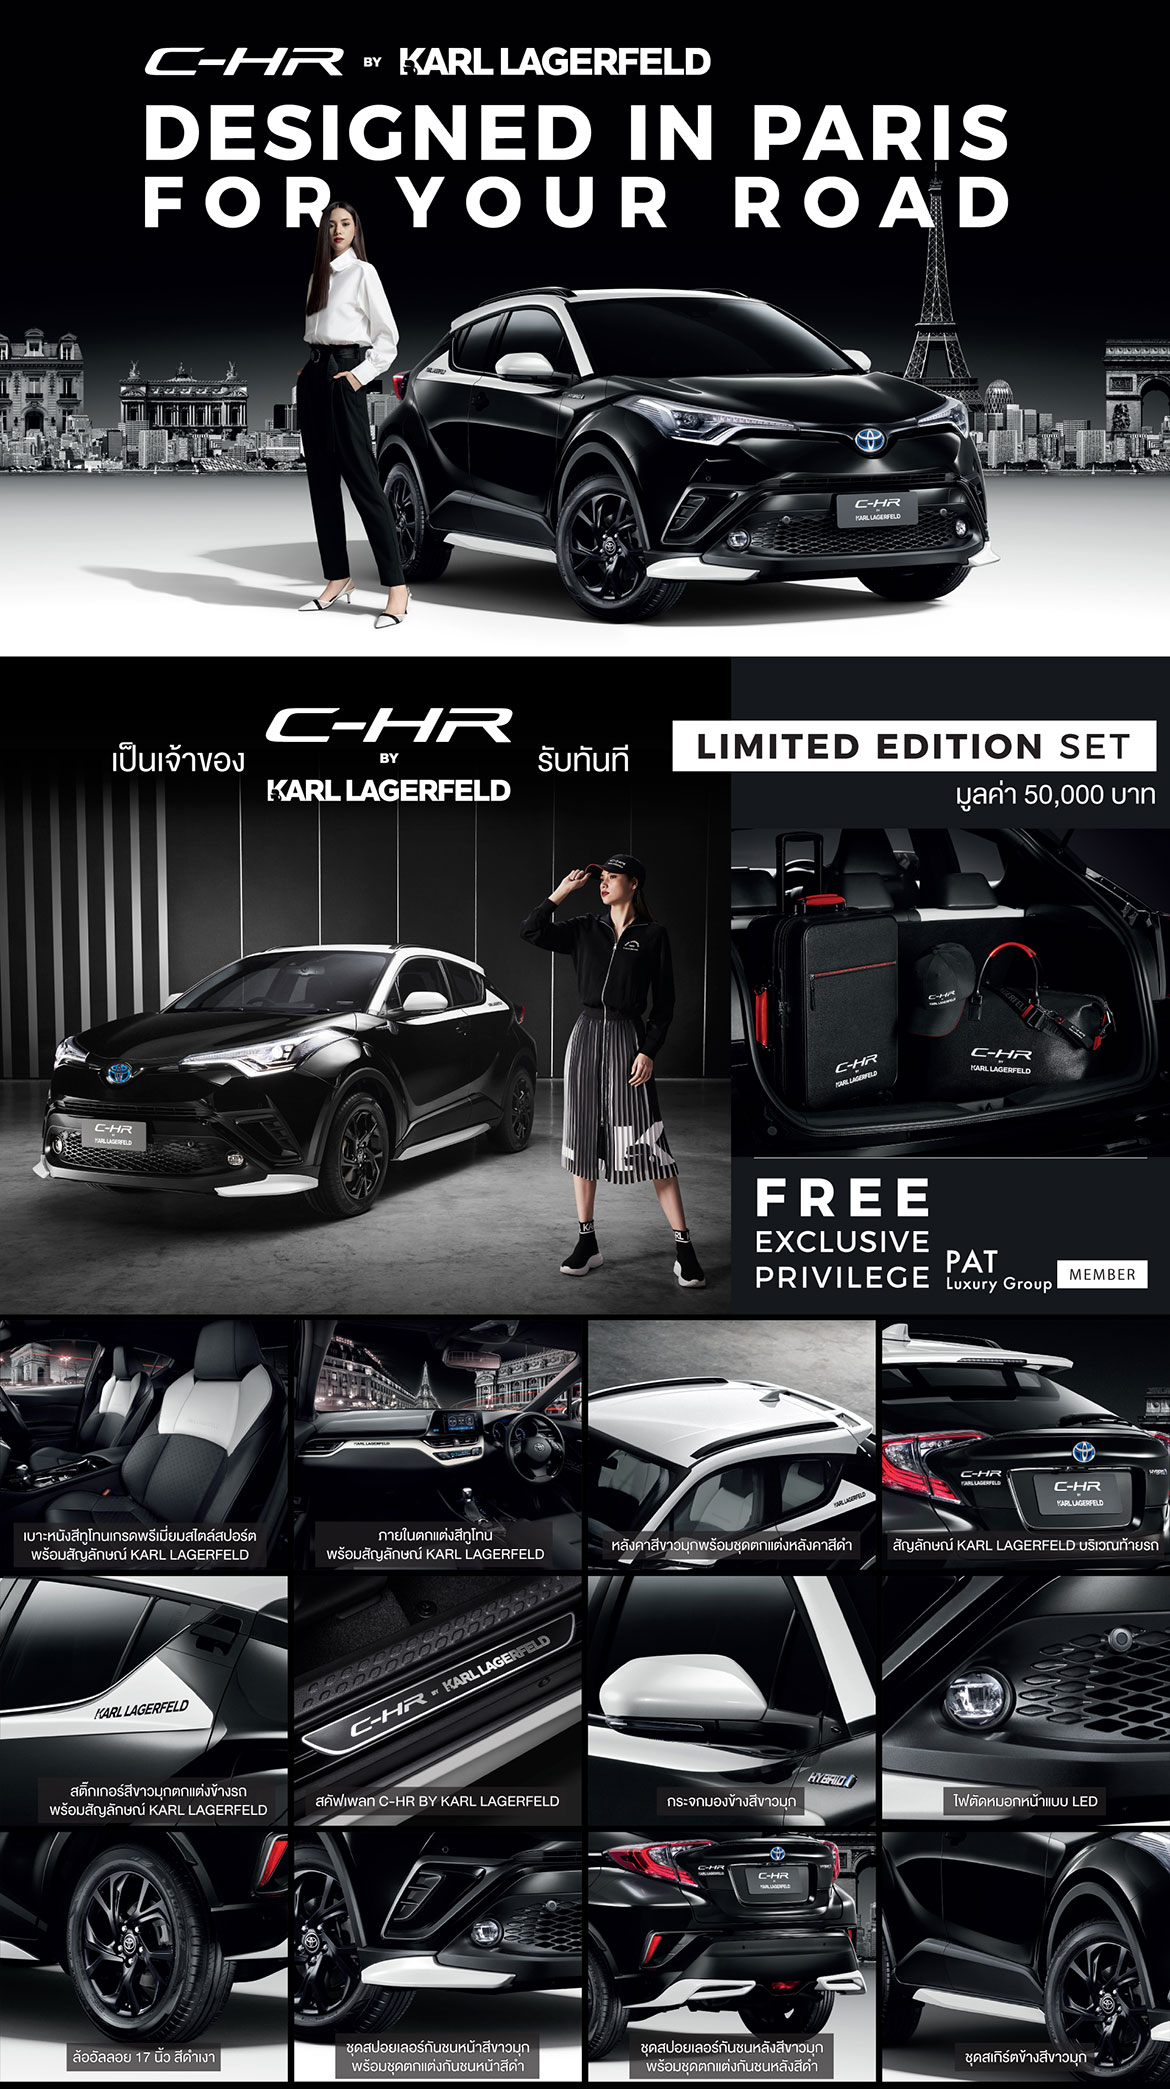 CH-R by KARLLAGERFELD Designed In Paris For Your Road